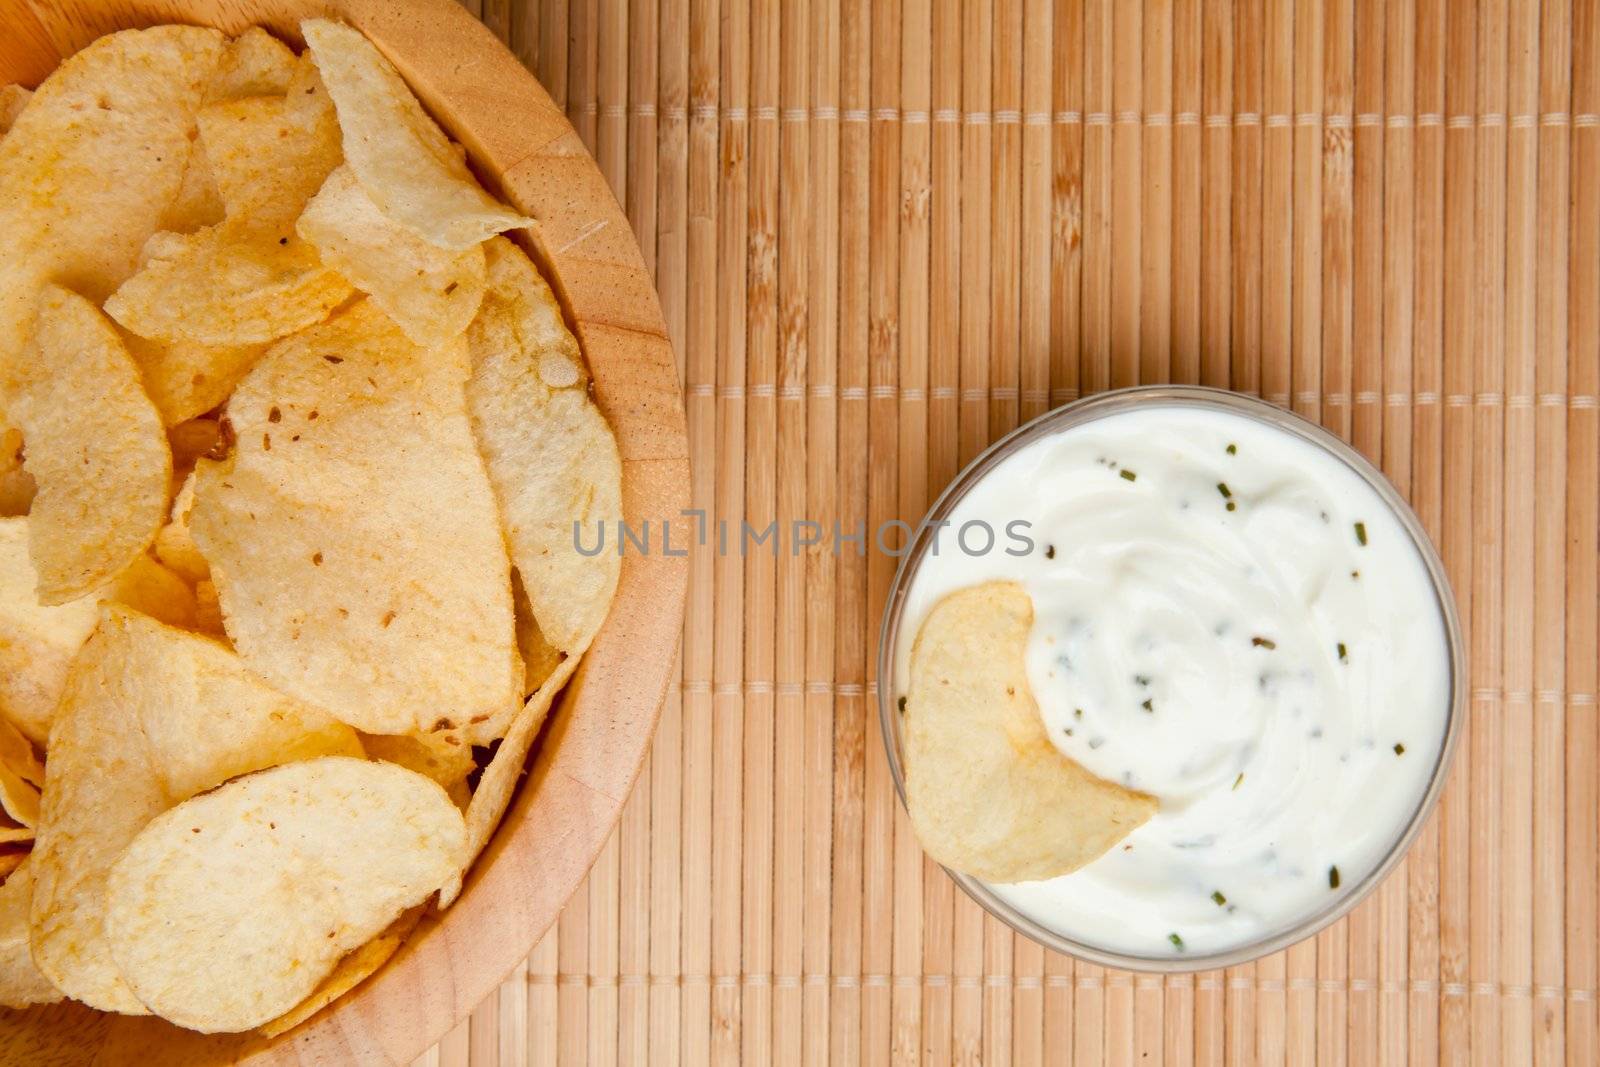 A bowl of chips and a bowl of white dip with herbs side by side